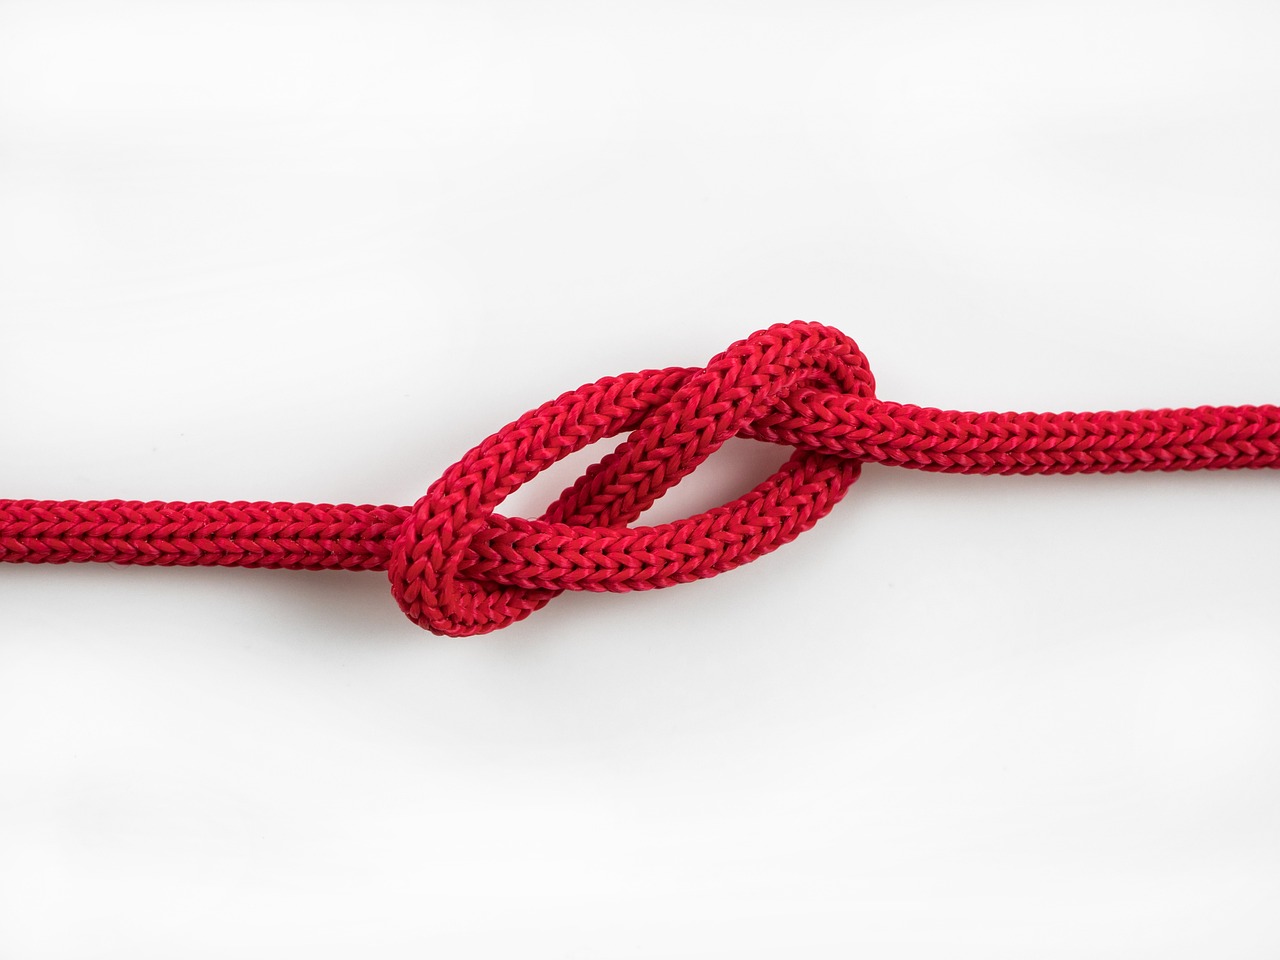 Red tied knot against white background